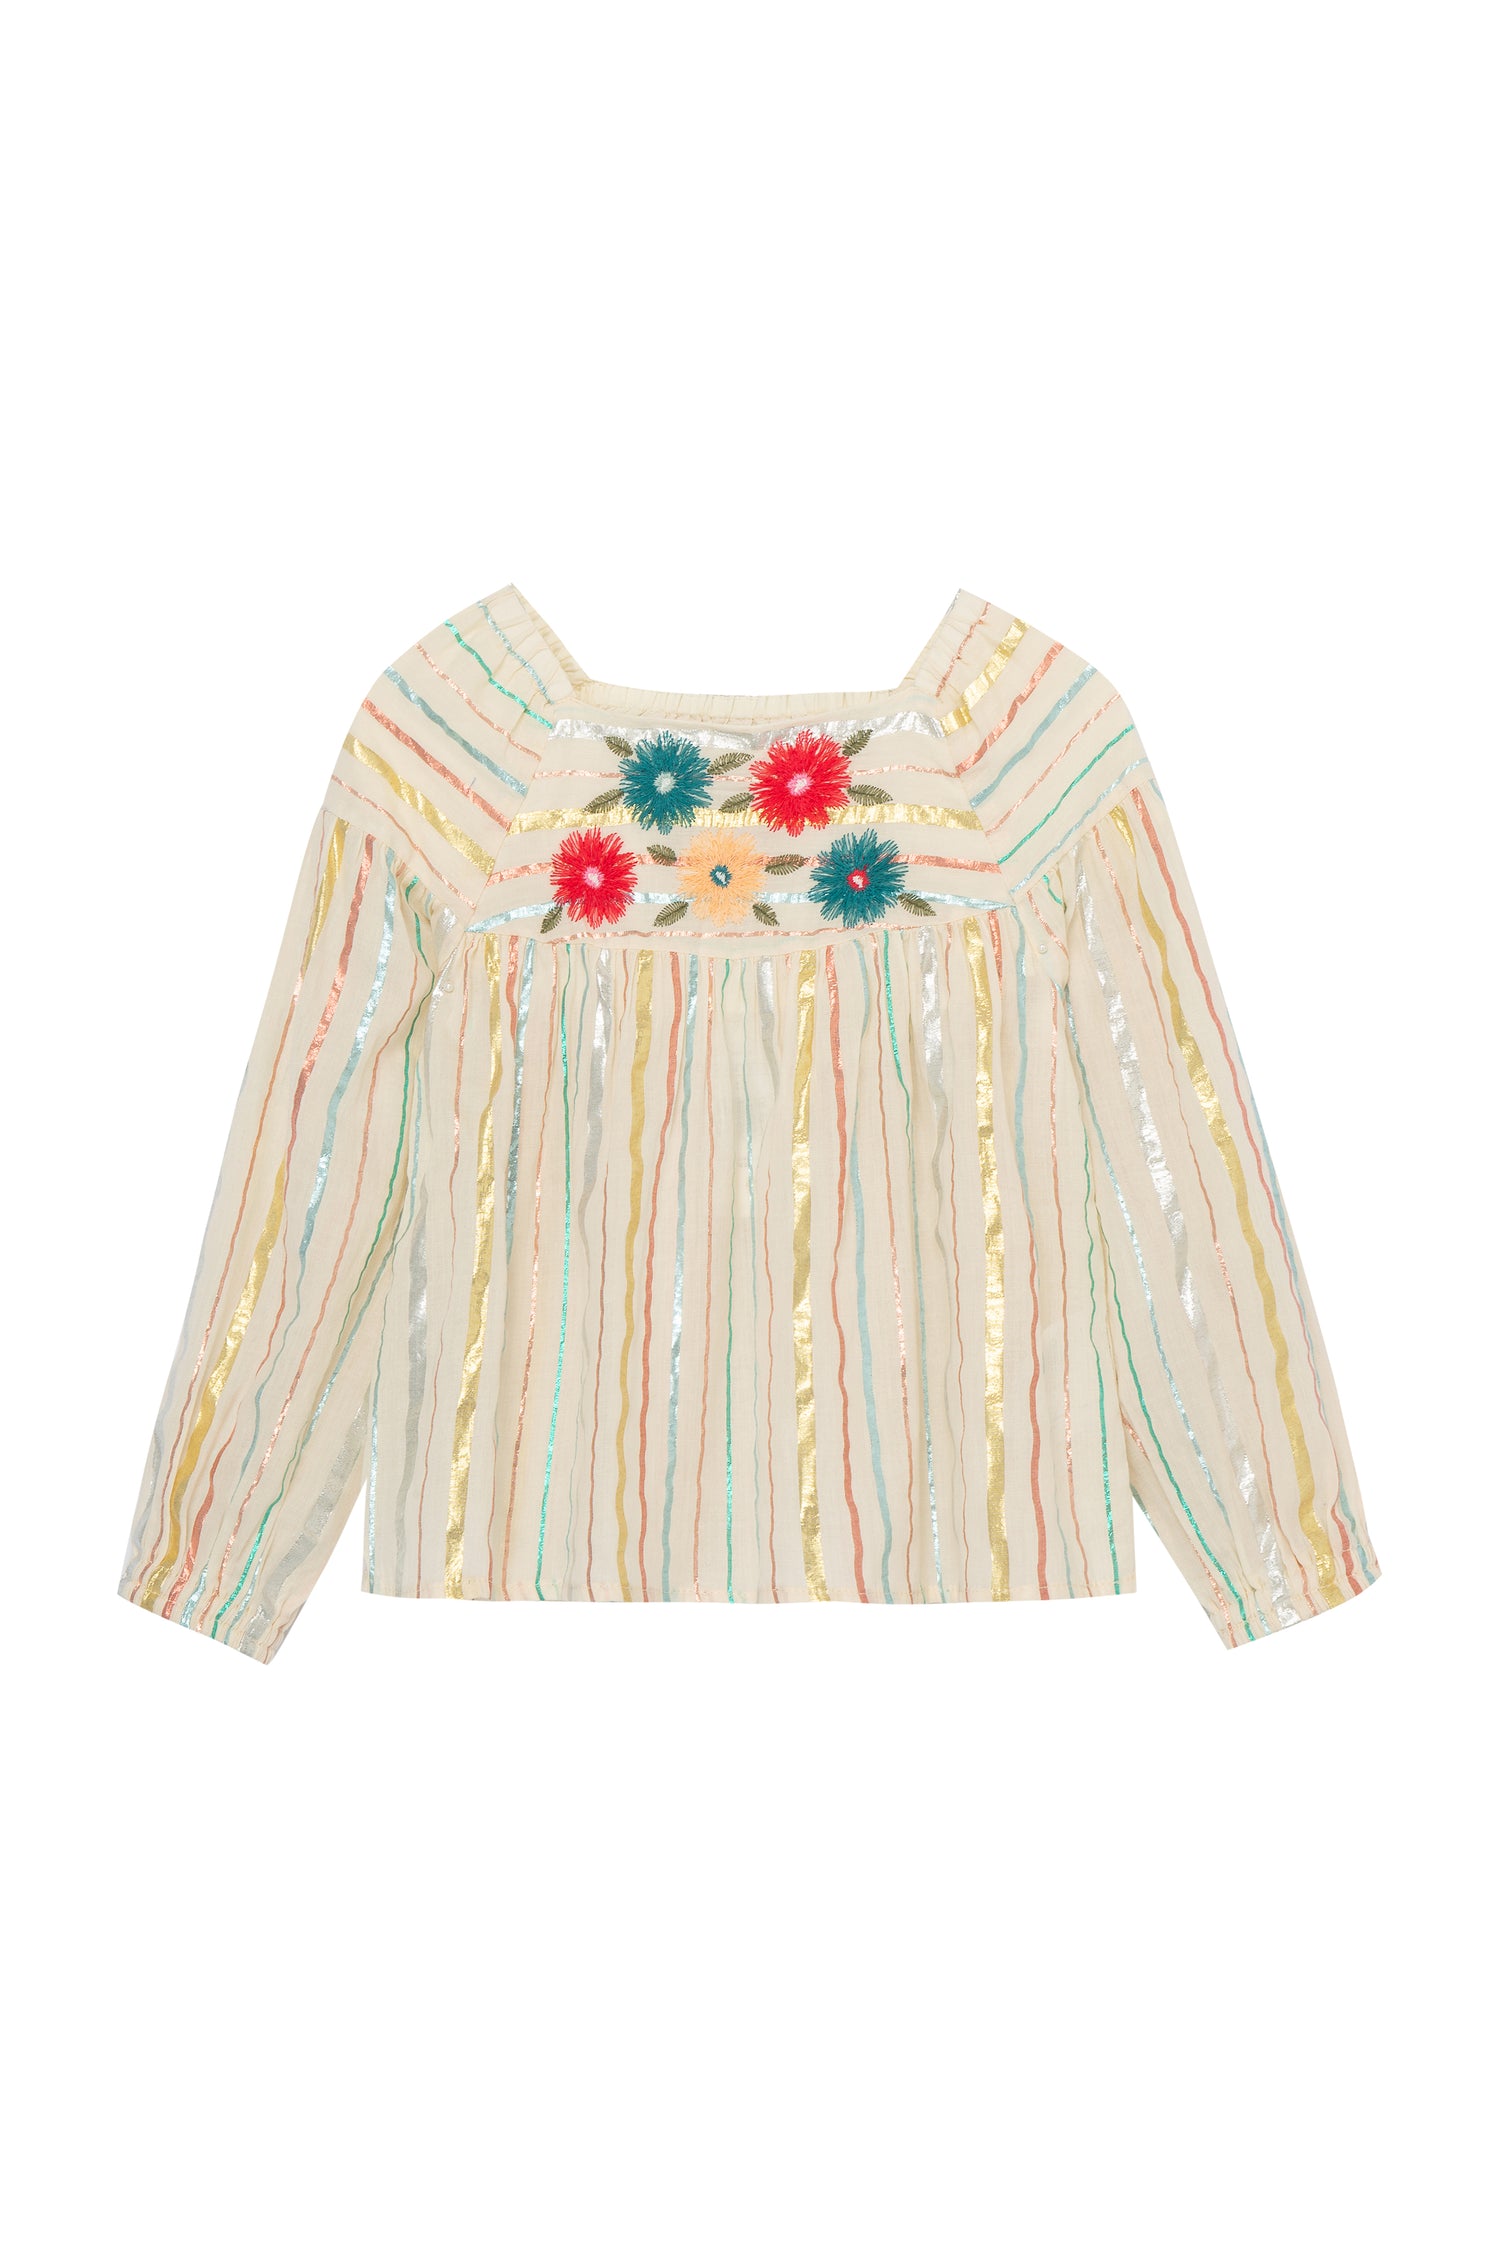 METALLIC STRIPED LONG SLEEVE TOP WITH EMBROIDERED FLORALS